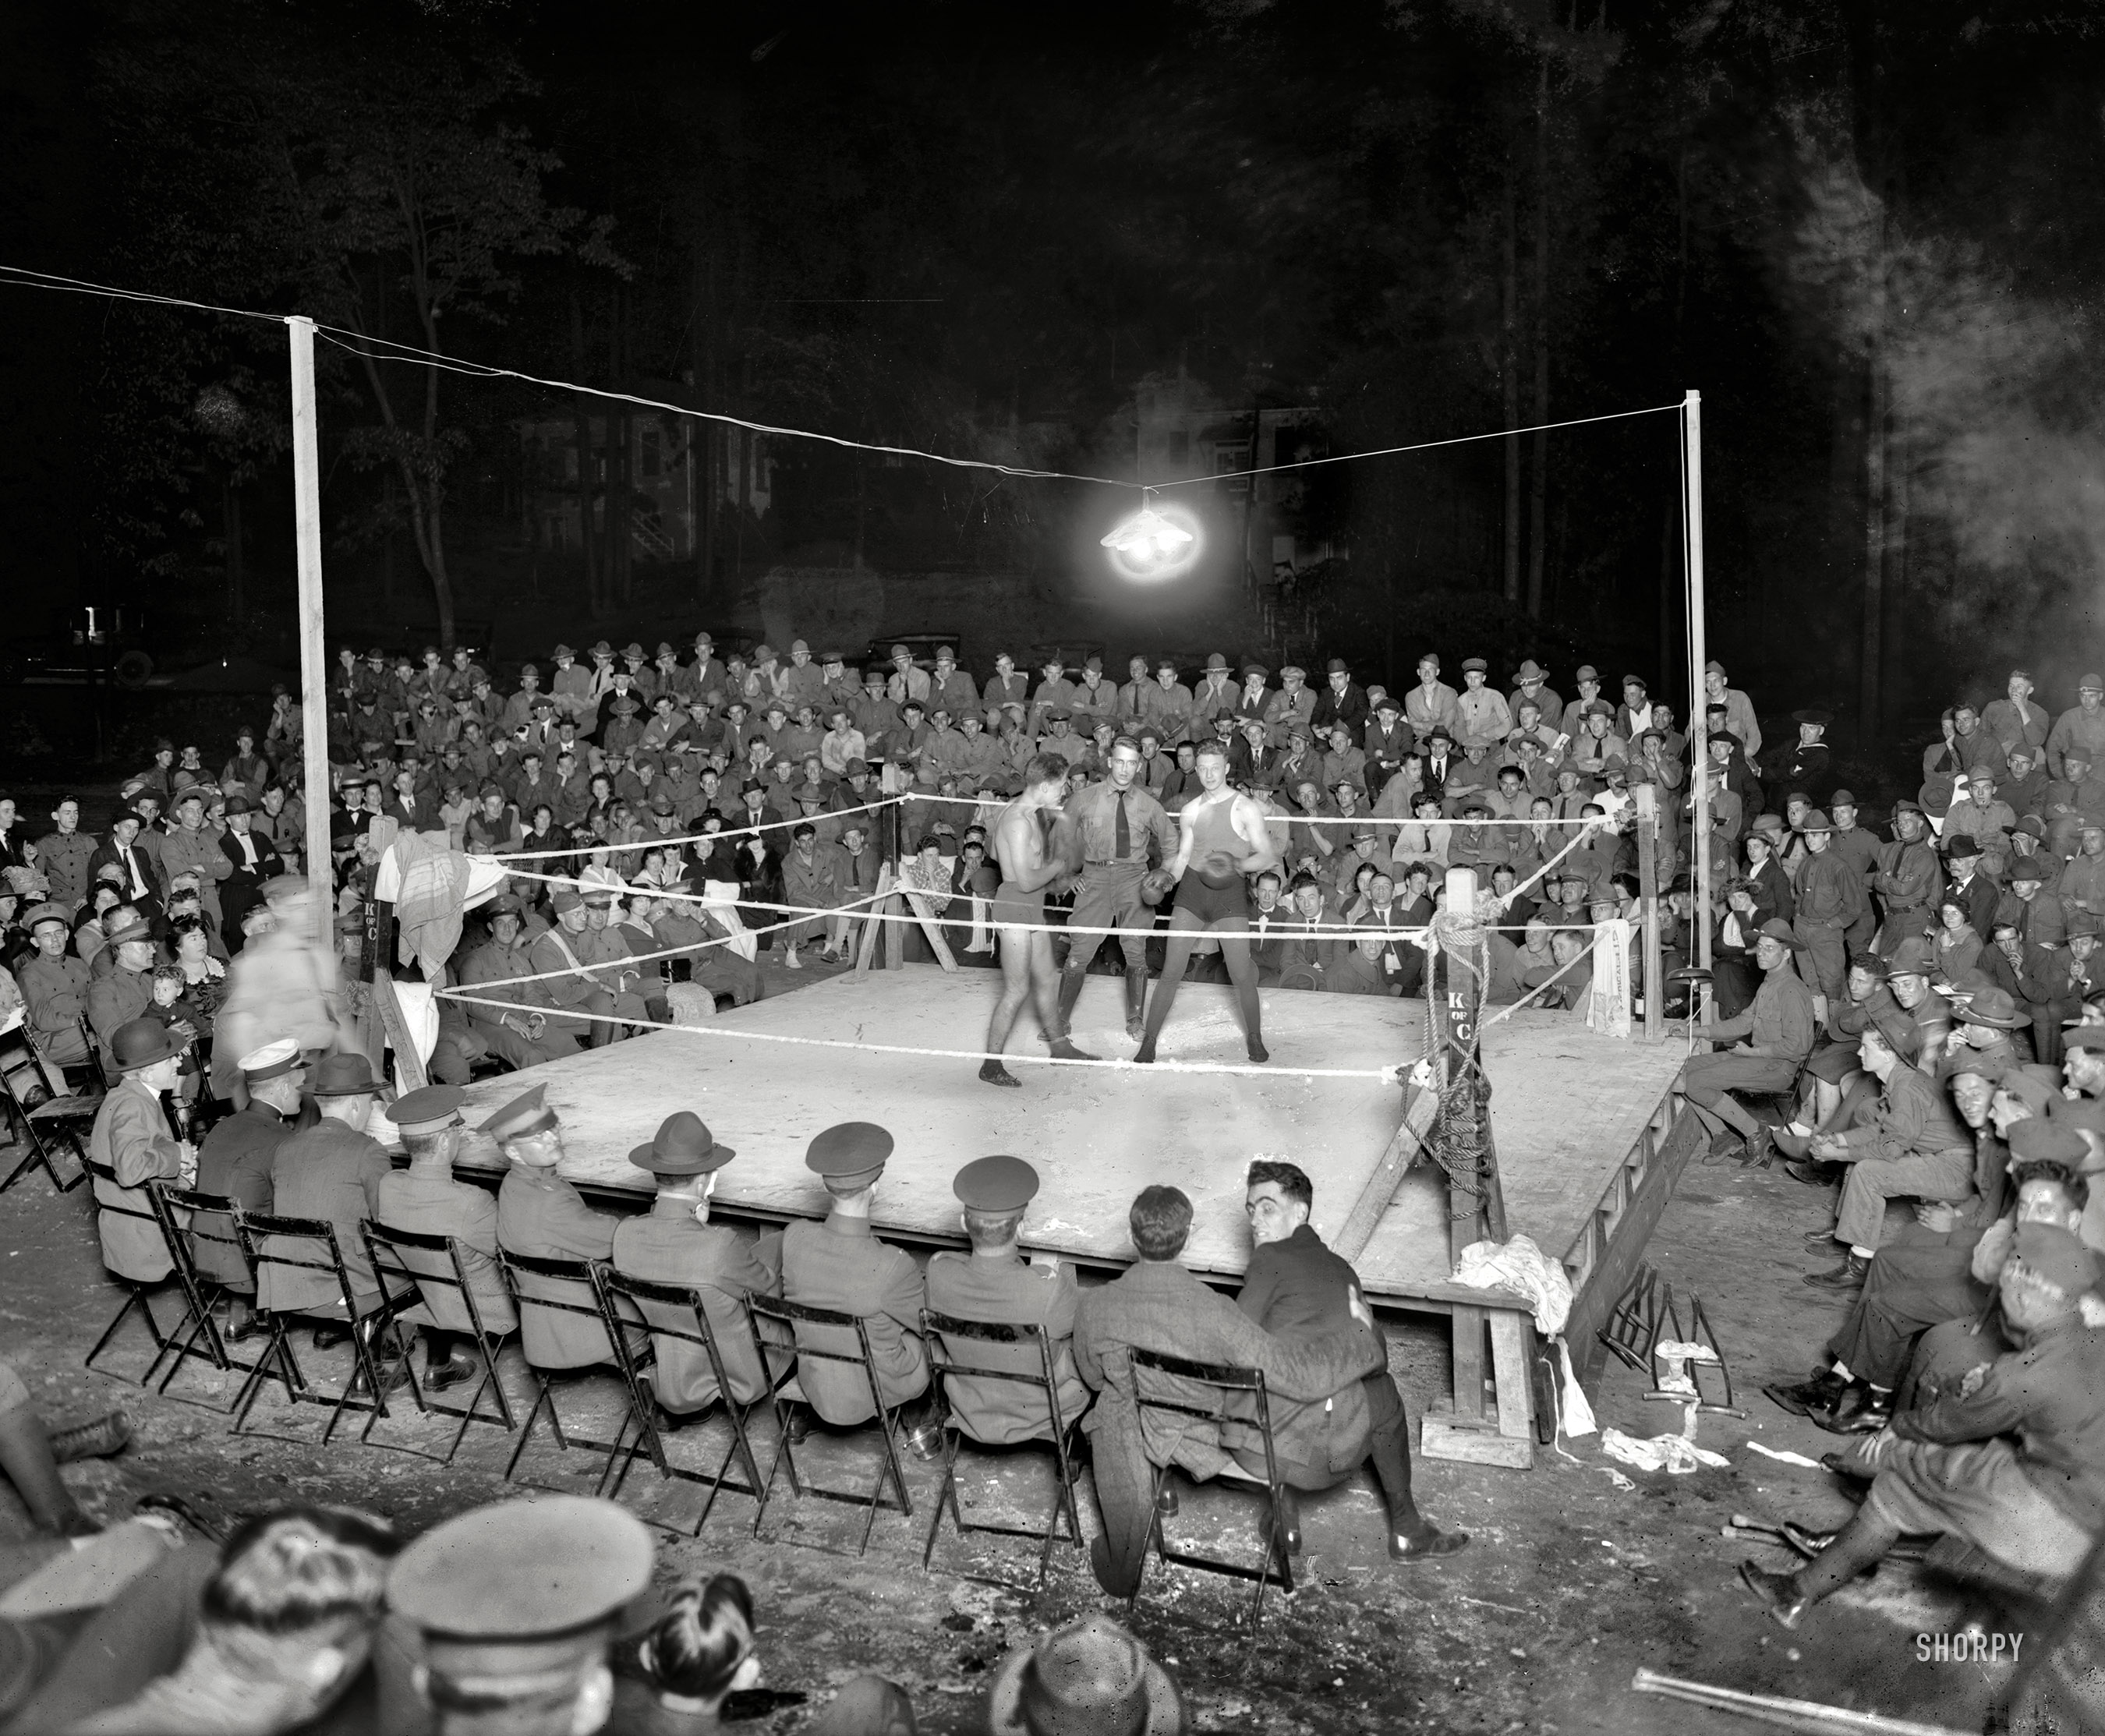 Washington, D.C., 1919. "Boxing at Walter Reed Hospital." Another look at the proceedings first glimpsed here. National Photo glass negative. View full size.